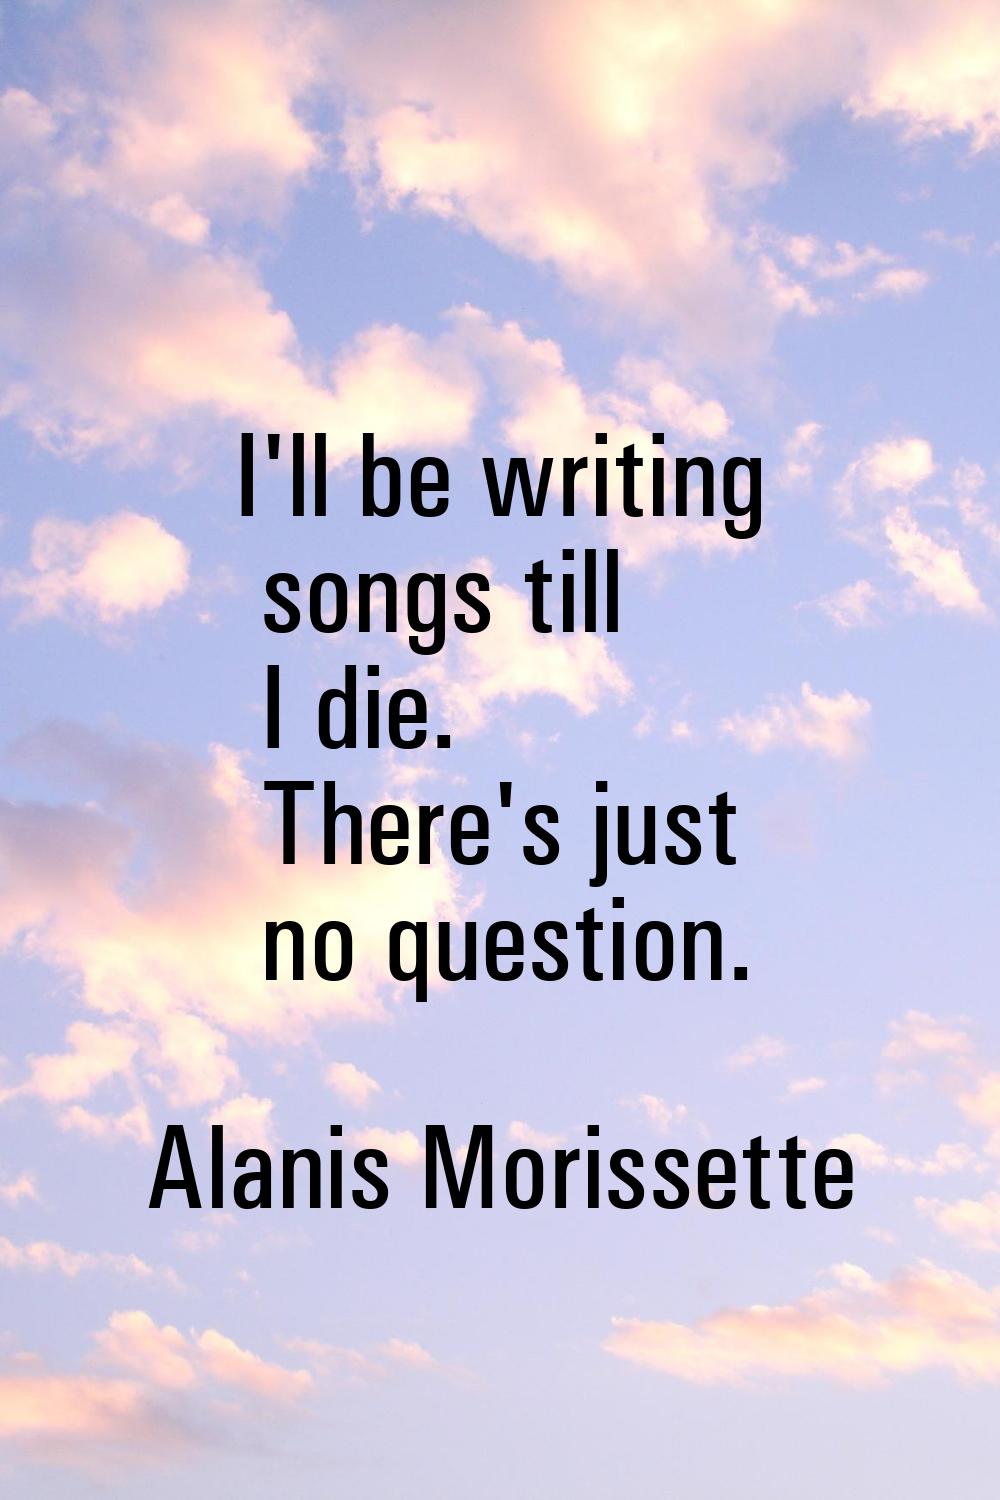 I'll be writing songs till I die. There's just no question.